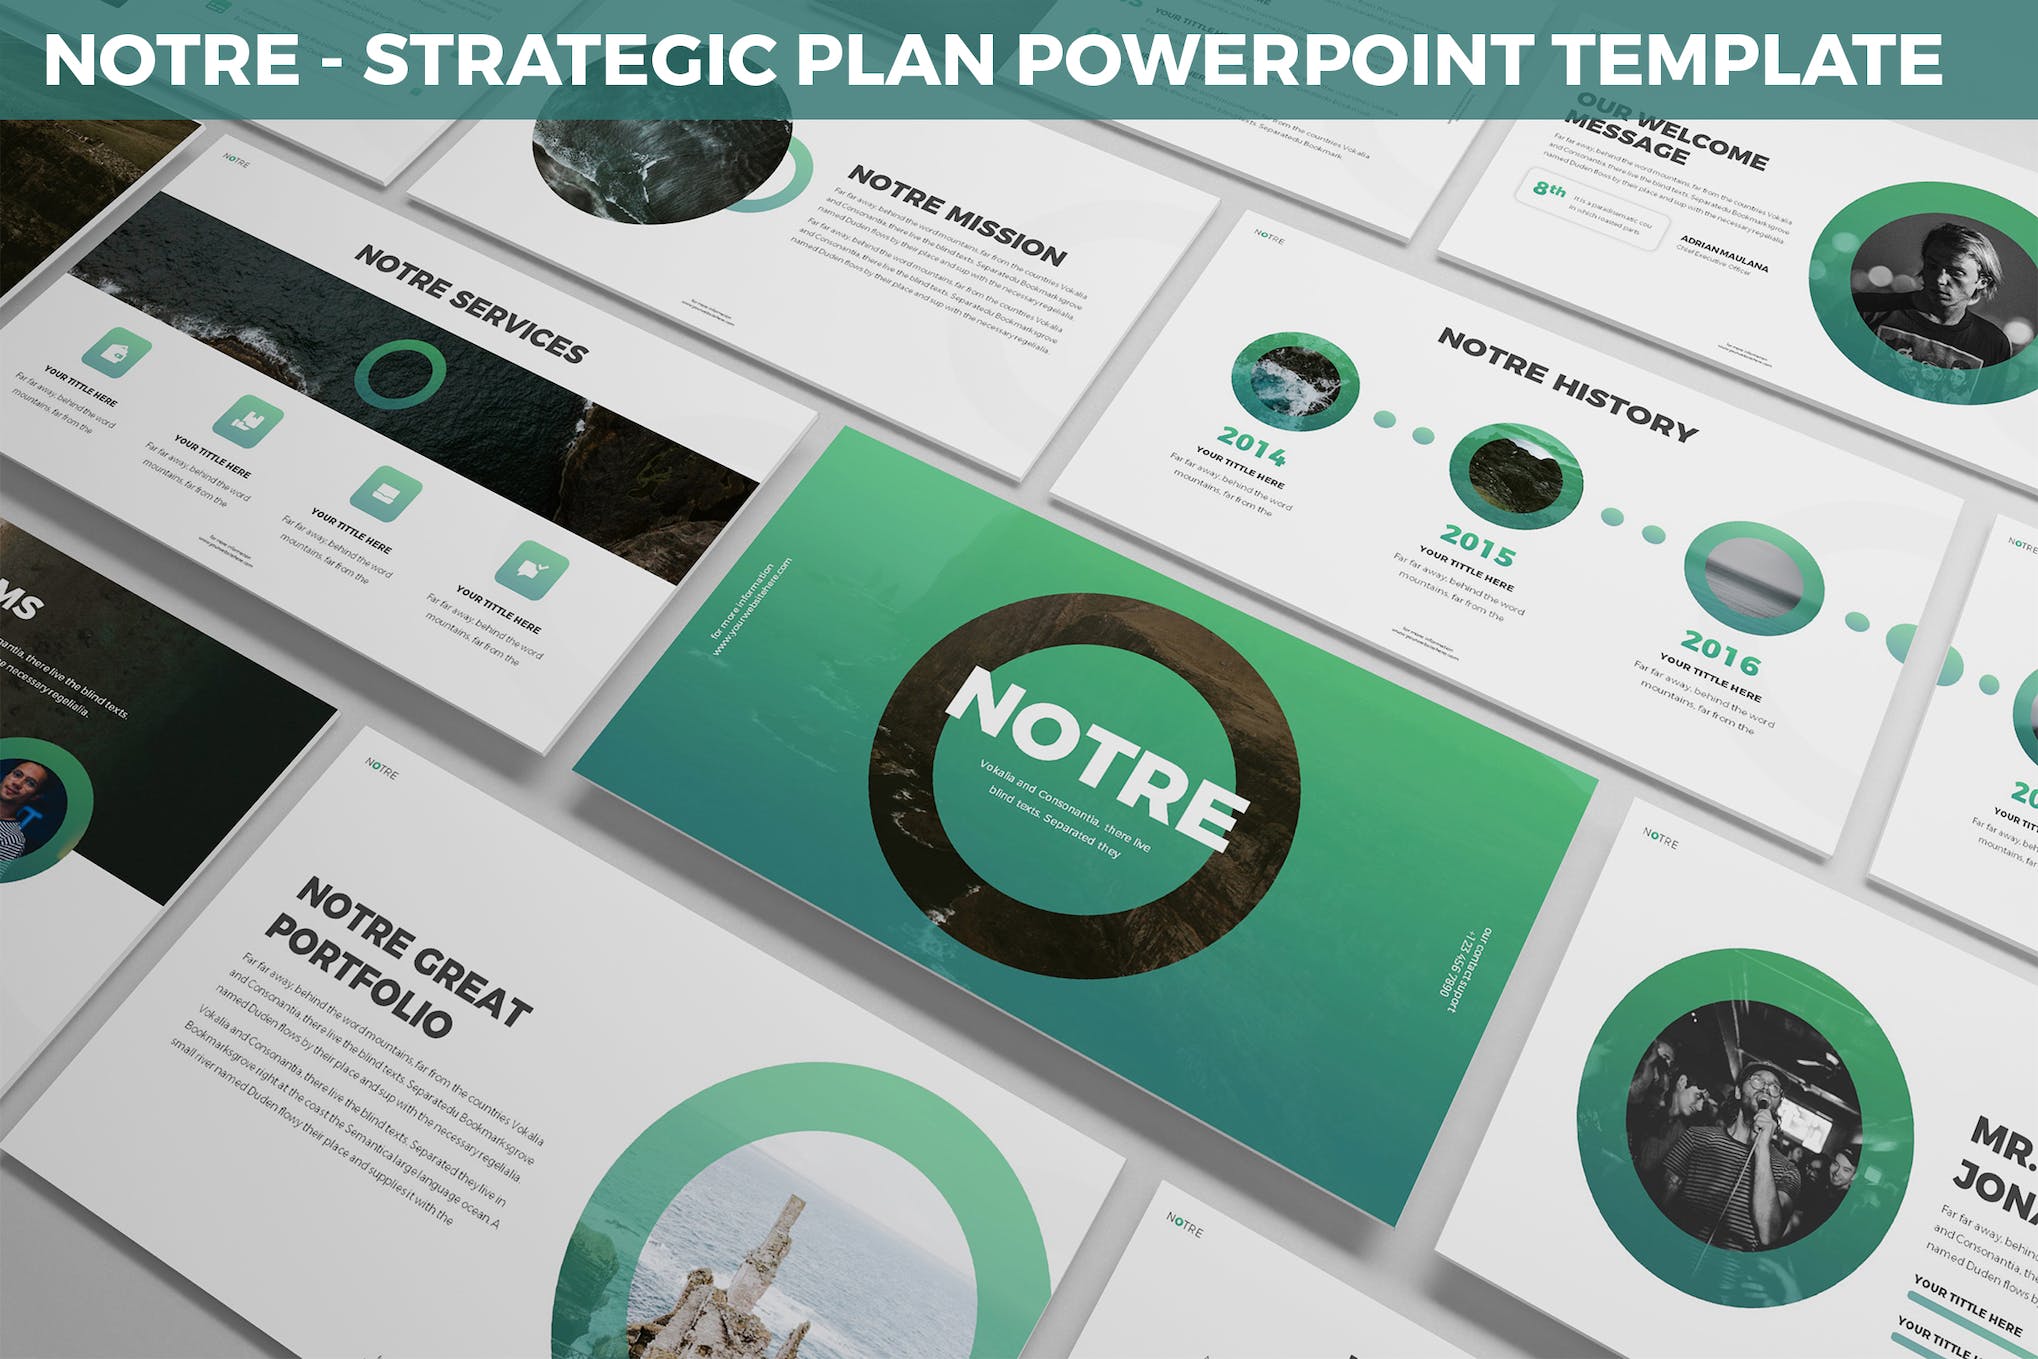 Cover image of Notre - Strategic Plan Powerpoint Template.